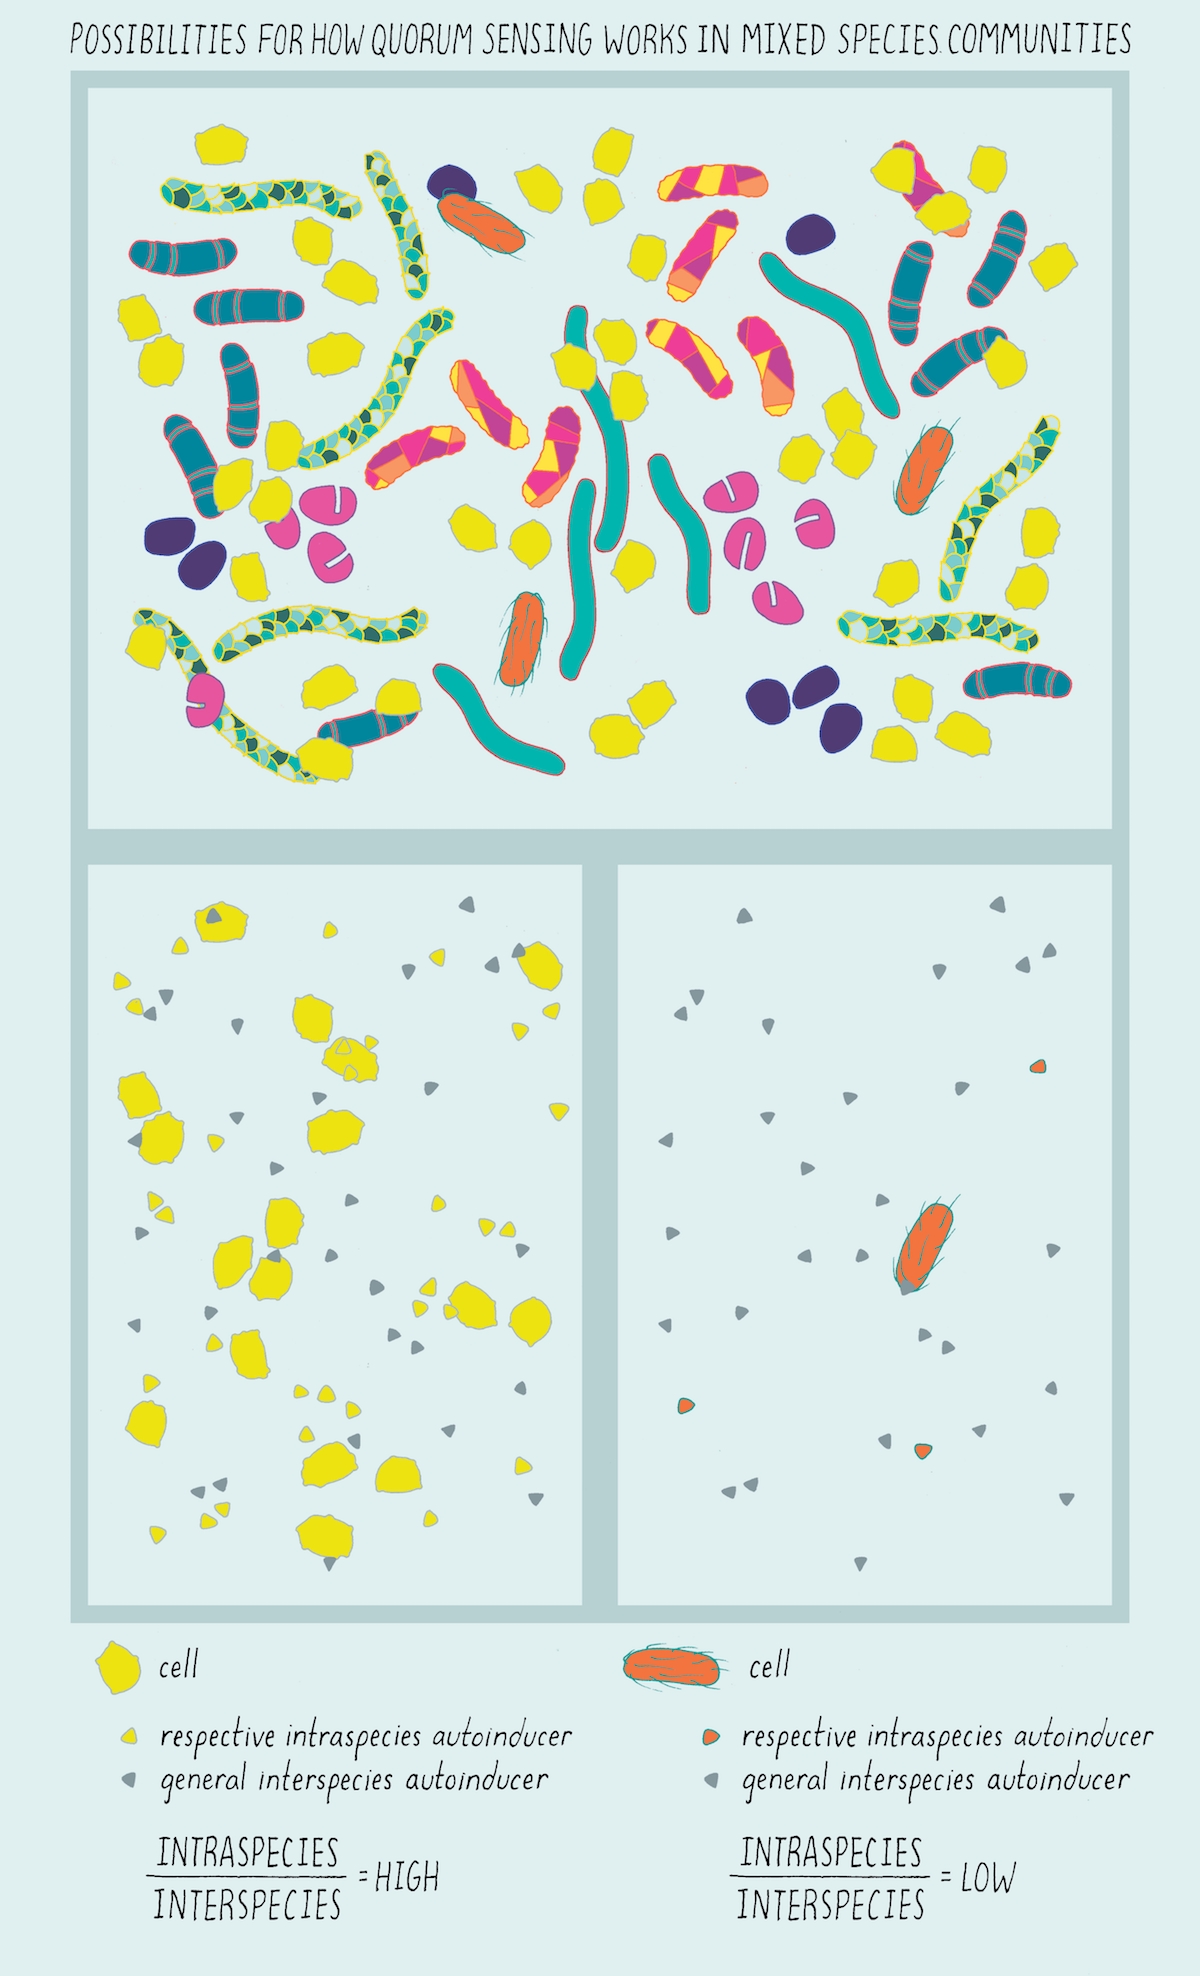 Illustration with colorful cells divided into three sections